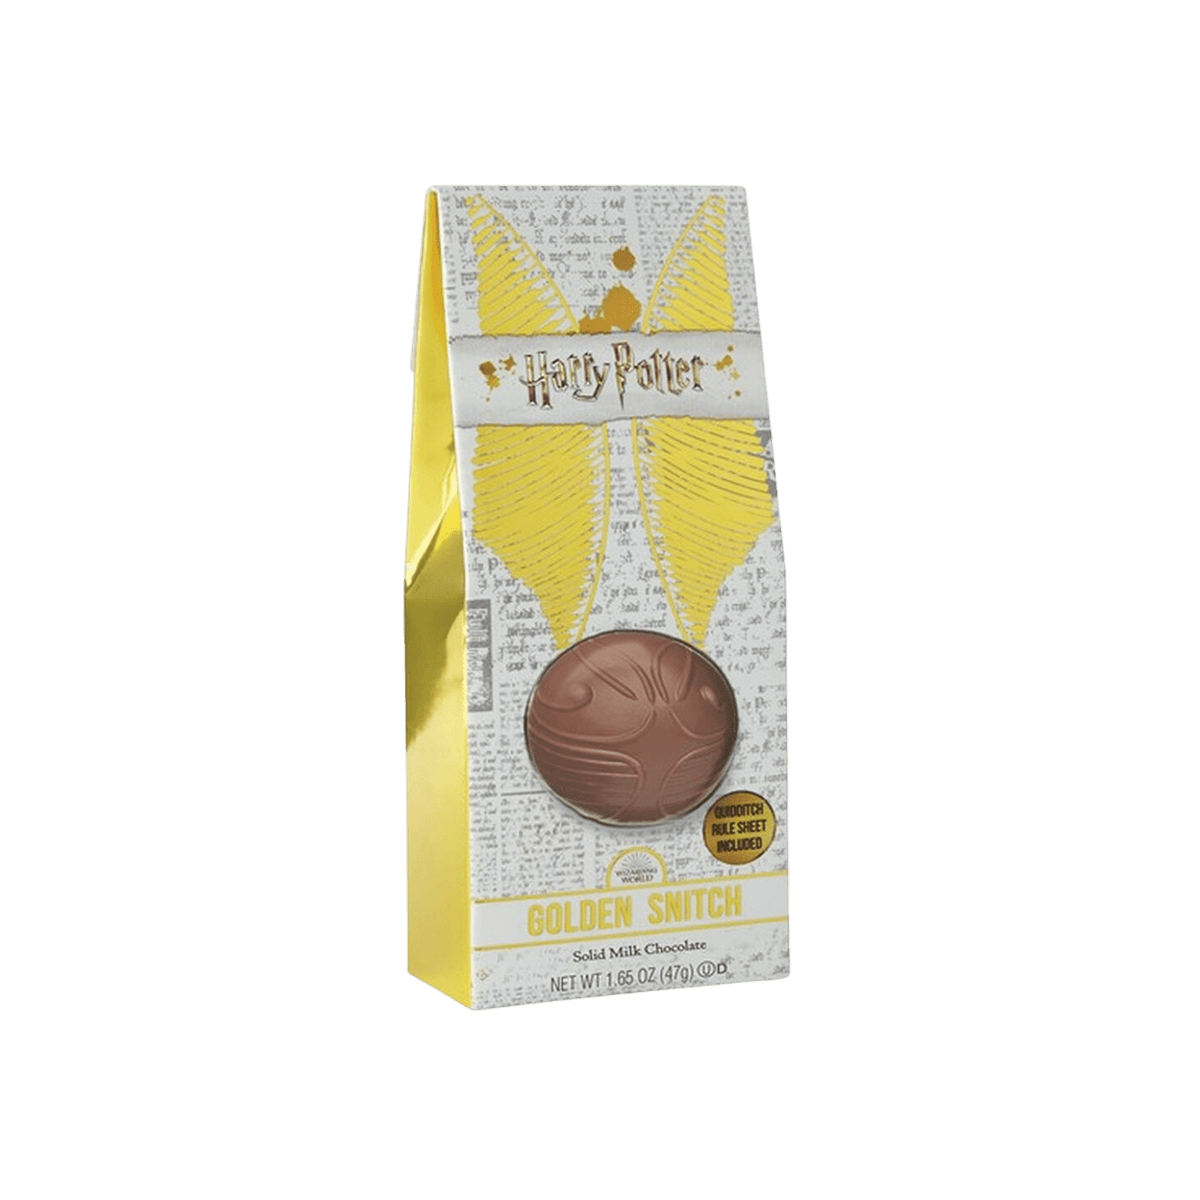 Lolli and Pops Novelty Harry Potter Chocolate Golden Snitch